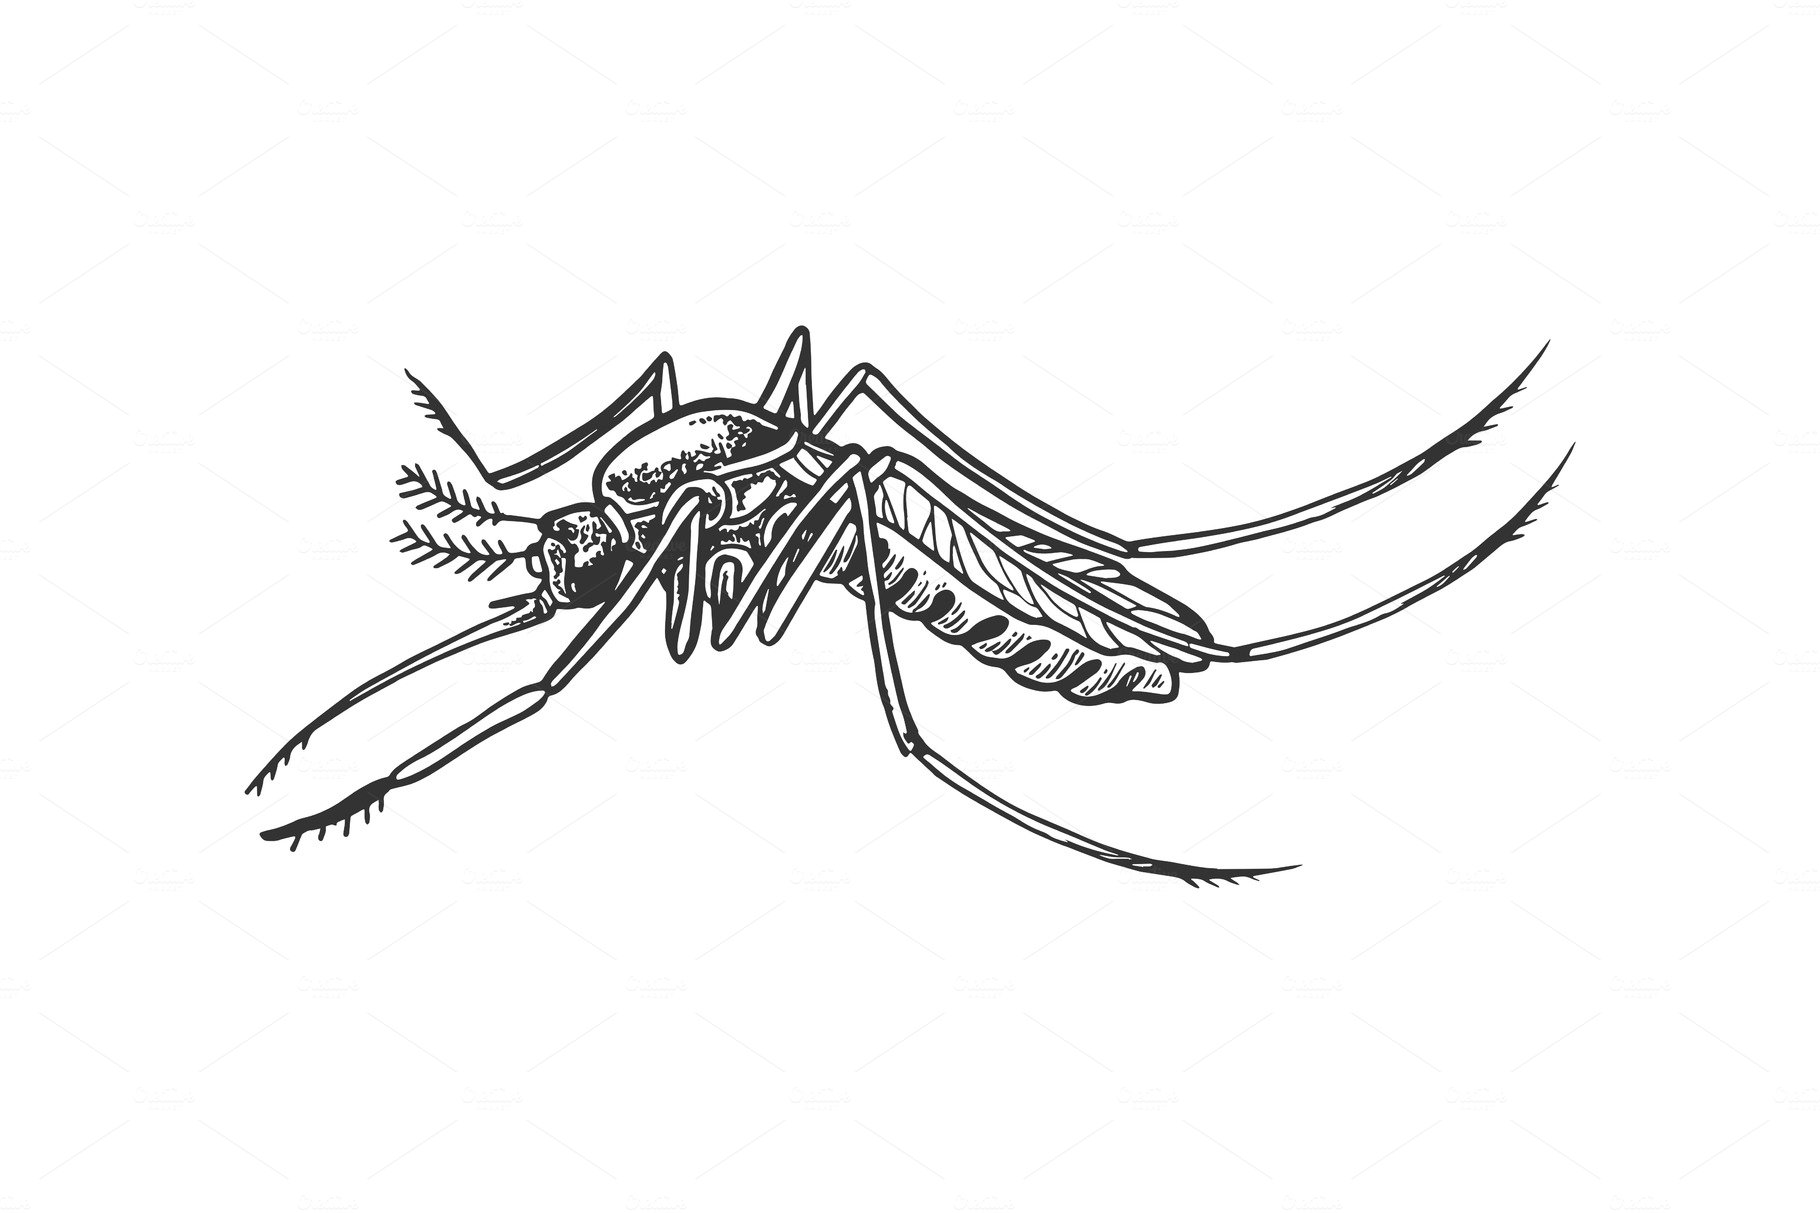 Mosquito insect engraving vector cover image.